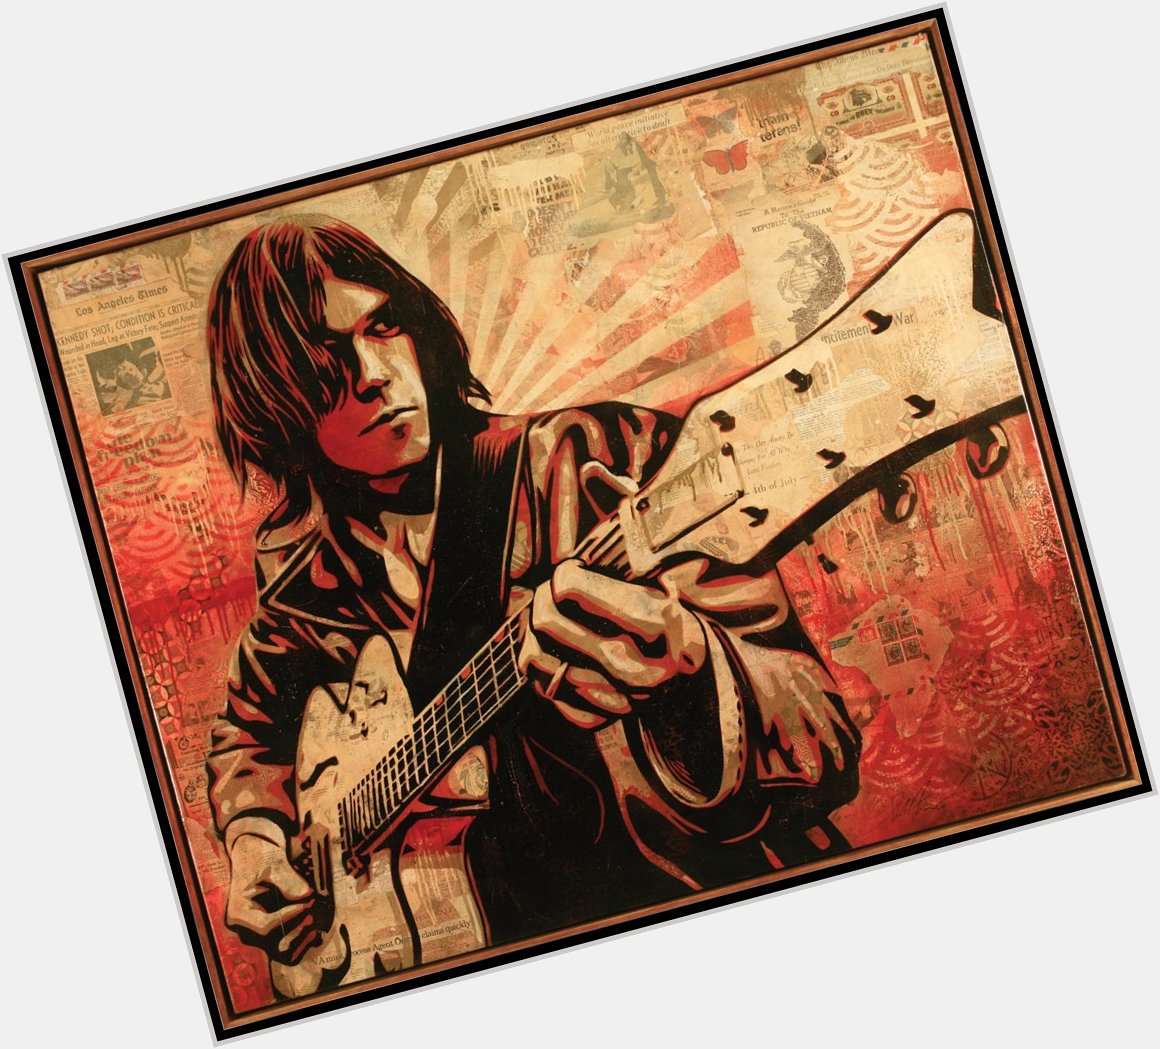 Neil Young, the legend of american rock sound turns 70 today
Happy birthday Neil 